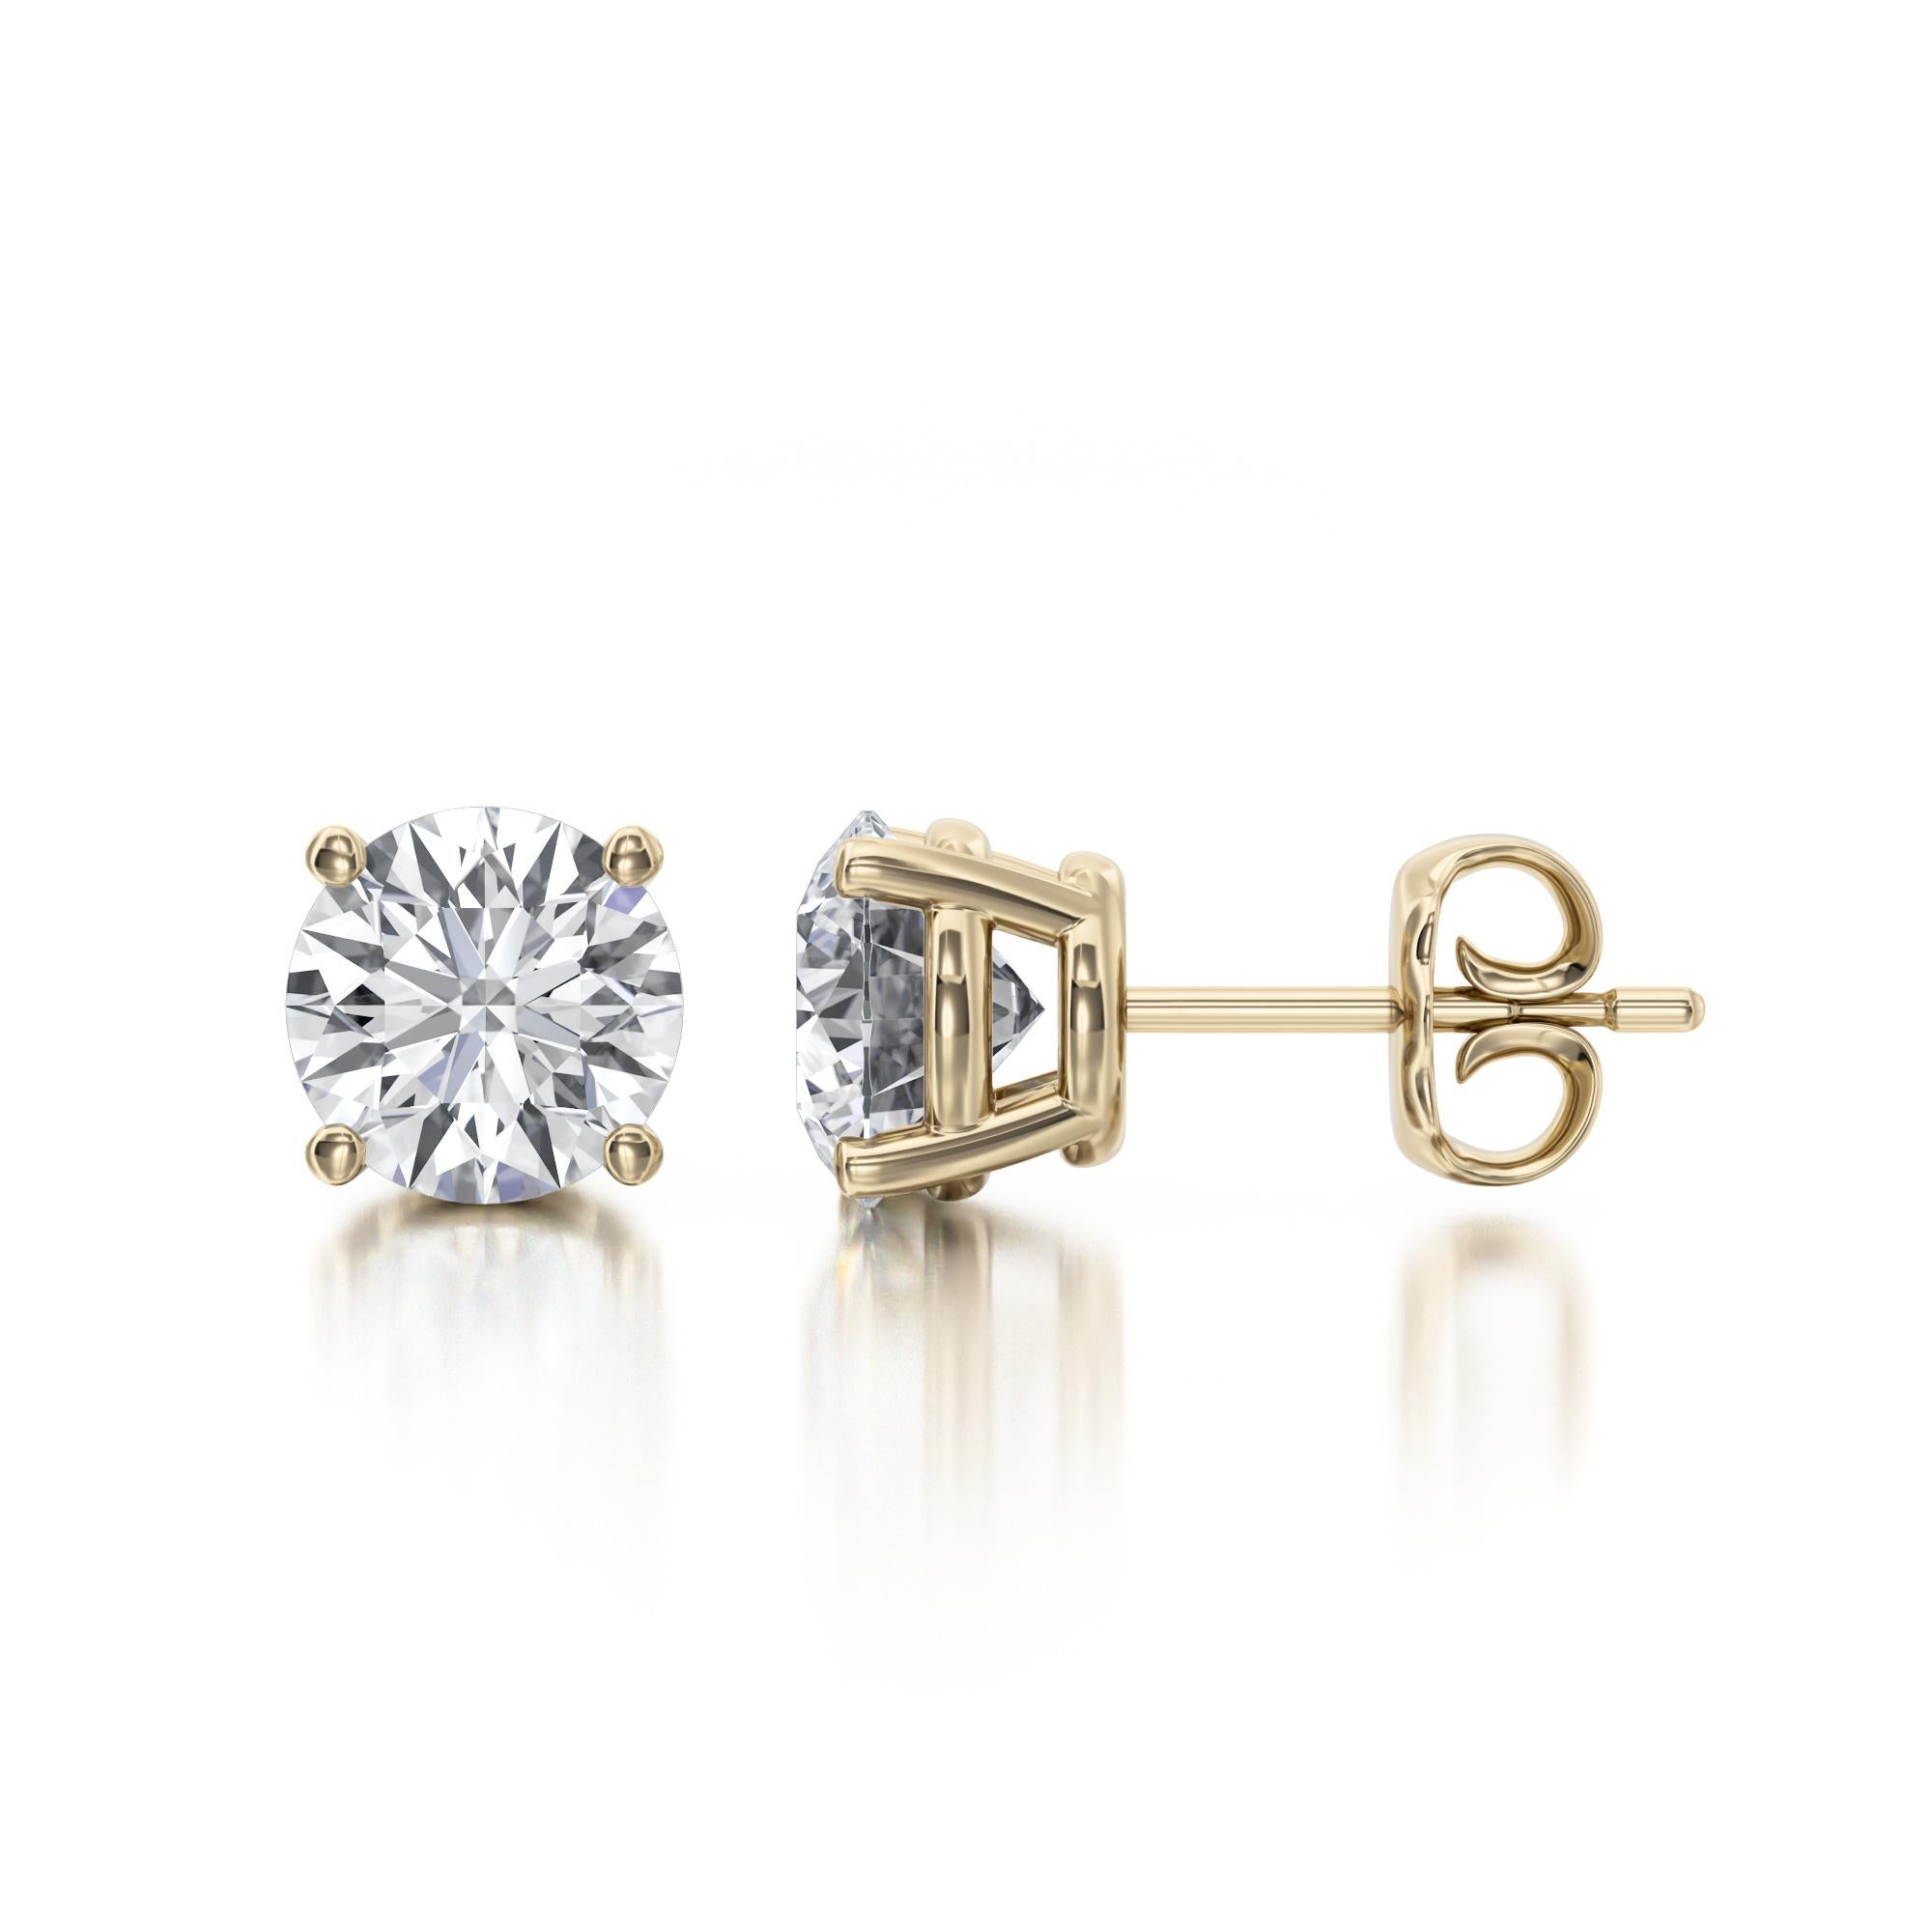 Contemporary 1.00 TCW Four Prong Diamond Stud Earrings 14K Yellow Gold